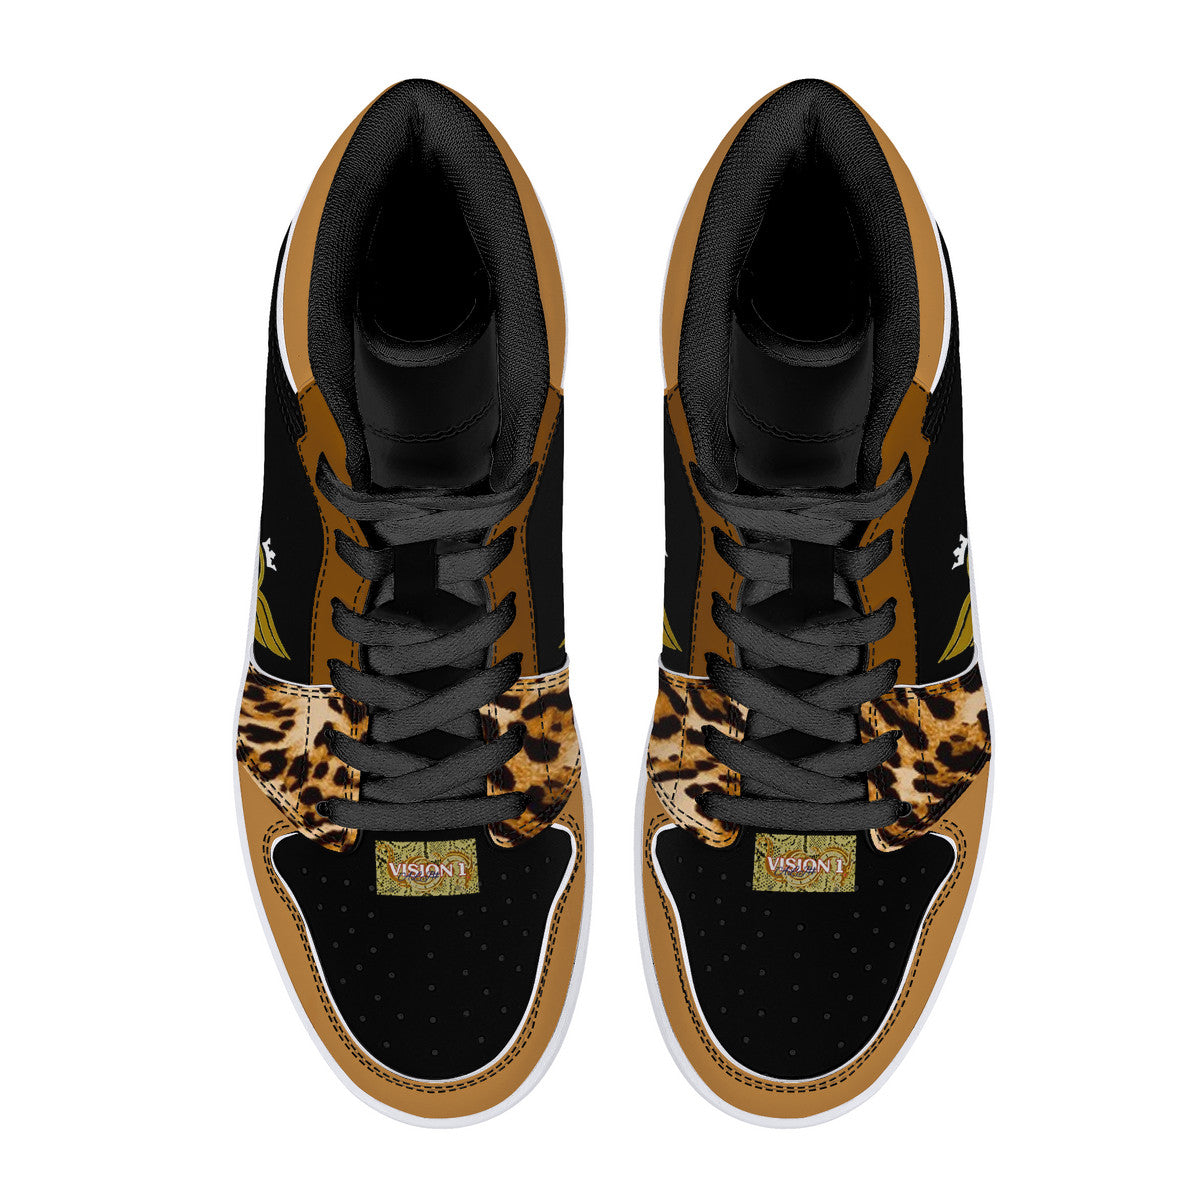 Majestic 2.0 Gold and Black | High Top Customized | Shoe Zero